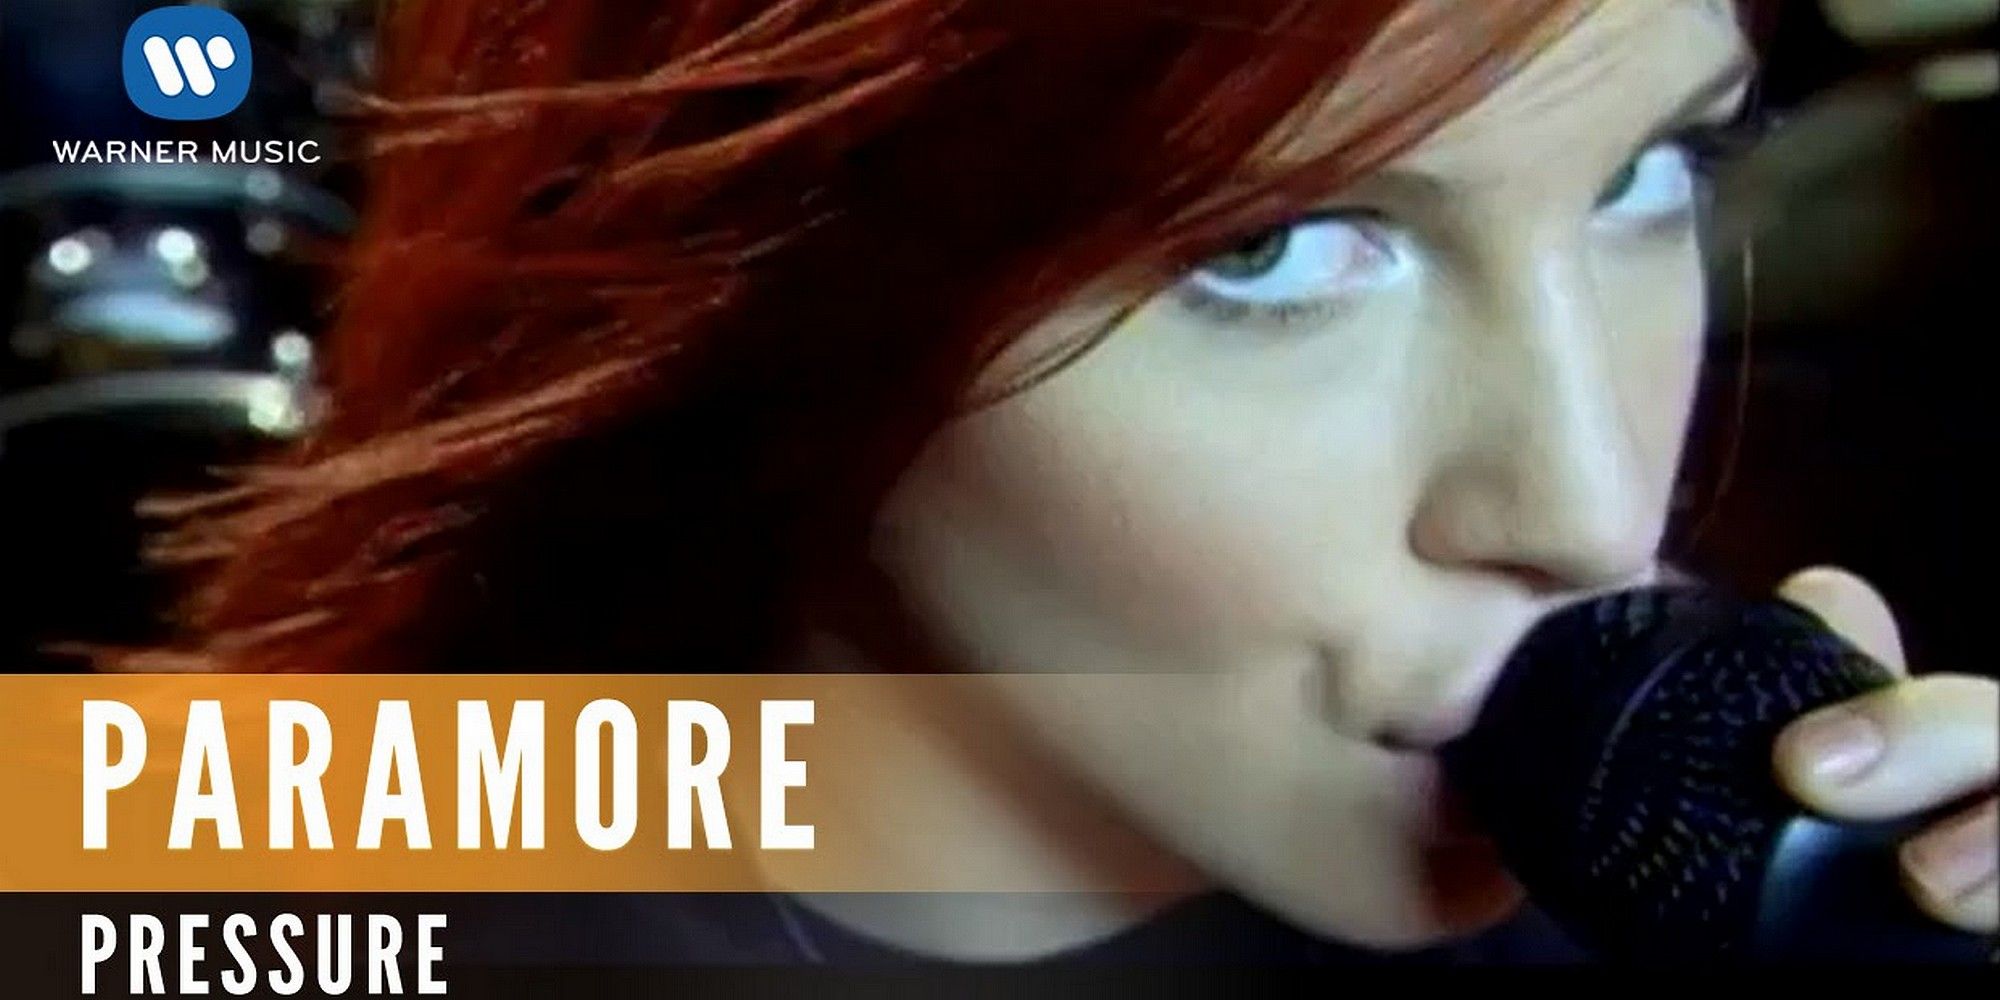 haley williams of paramore for the pressure music video thumbnail